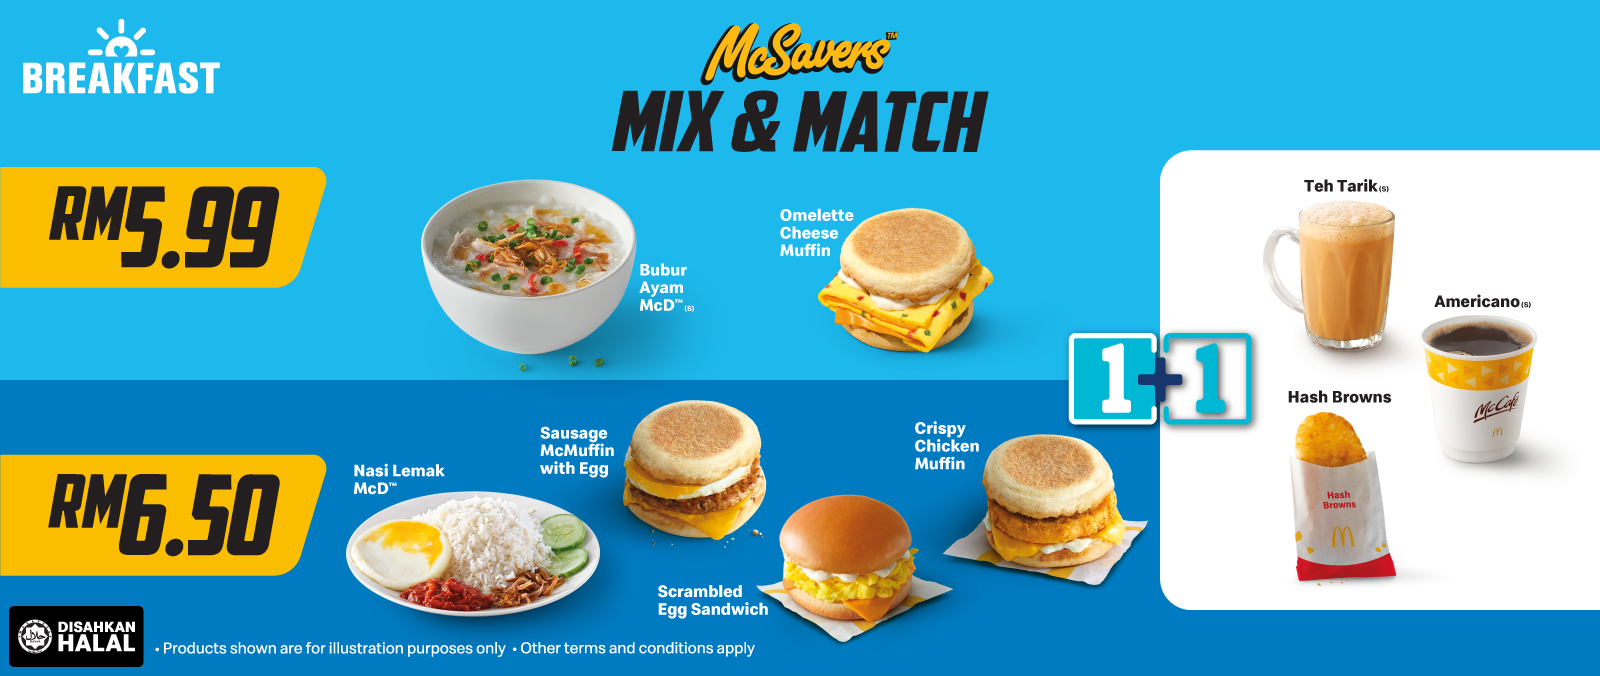 McDonald's Malaysia | Breakfast Mix & Match from only RM5.99